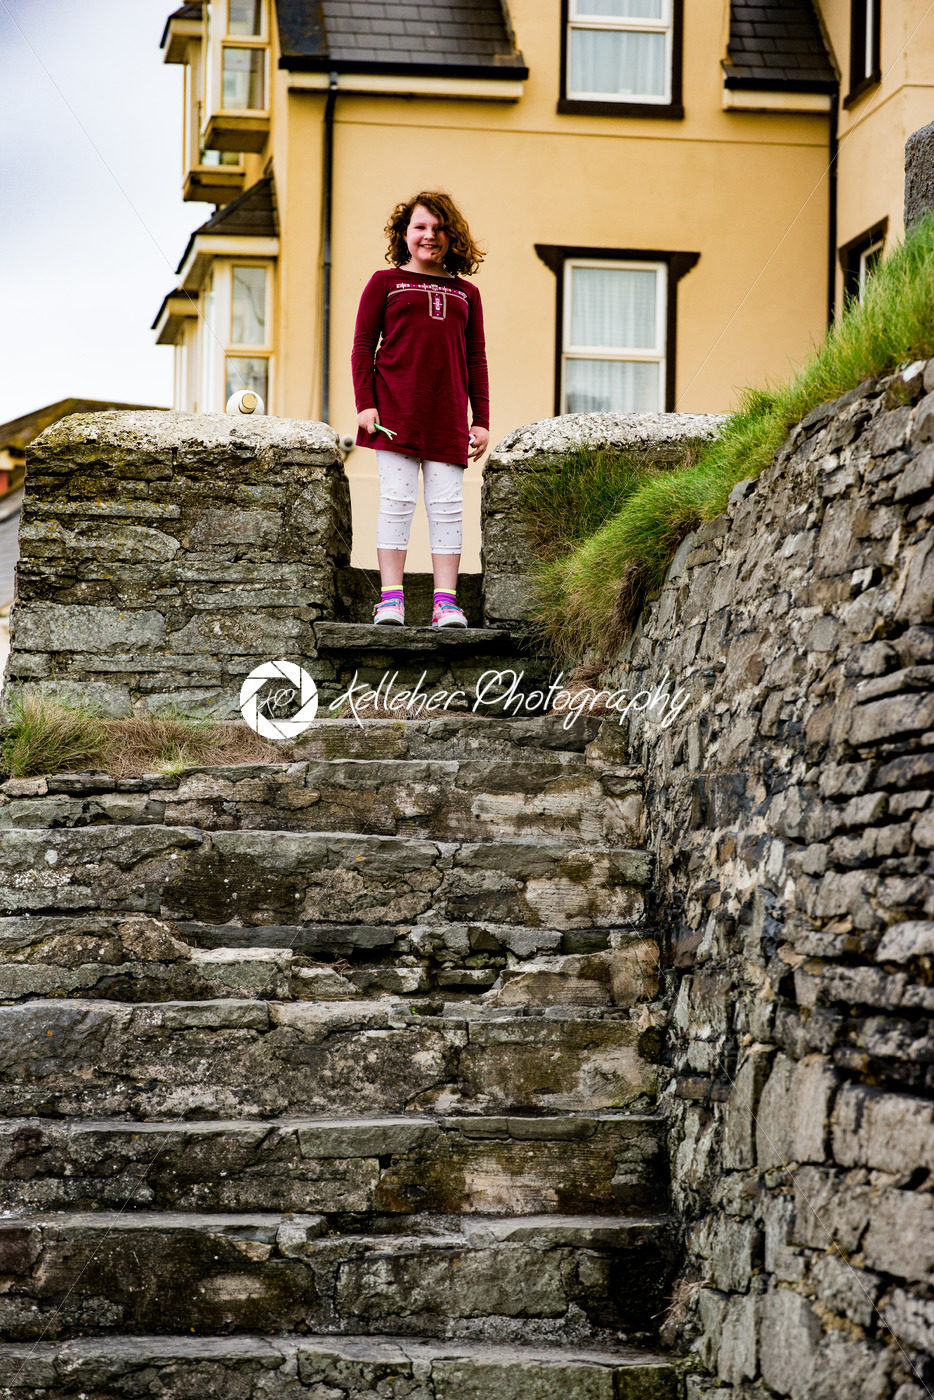 Young little girl portrait looking and smiling standing at top of rocky stairs - Kelleher Photography Store